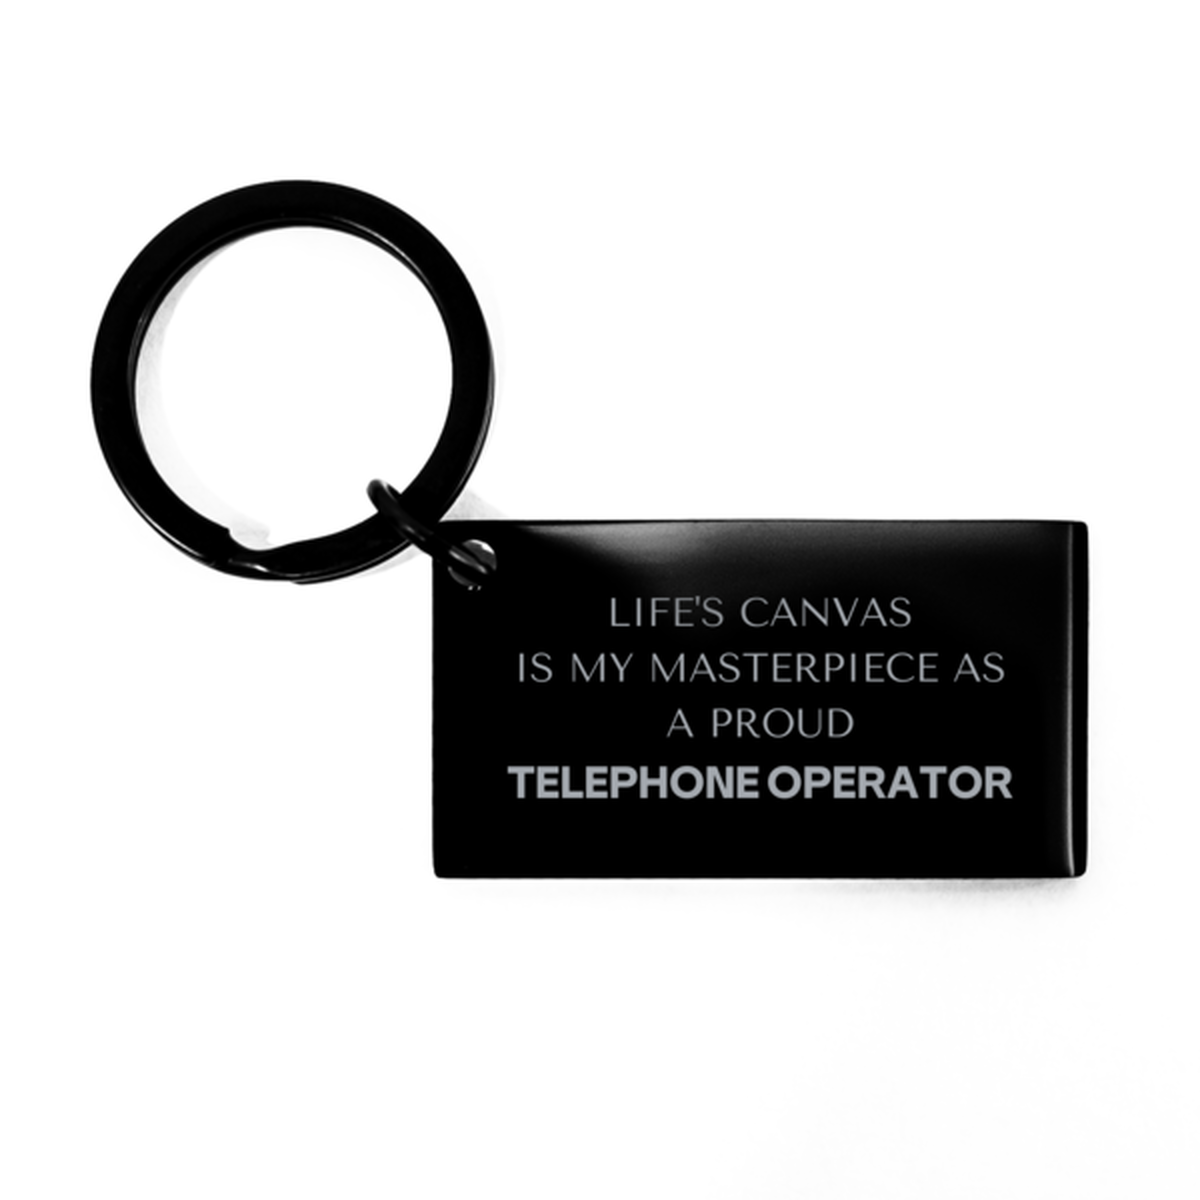 Proud Telephone Operator Gifts, Life's canvas is my masterpiece, Epic Birthday Christmas Unique Keychain For Telephone Operator, Coworkers, Men, Women, Friends